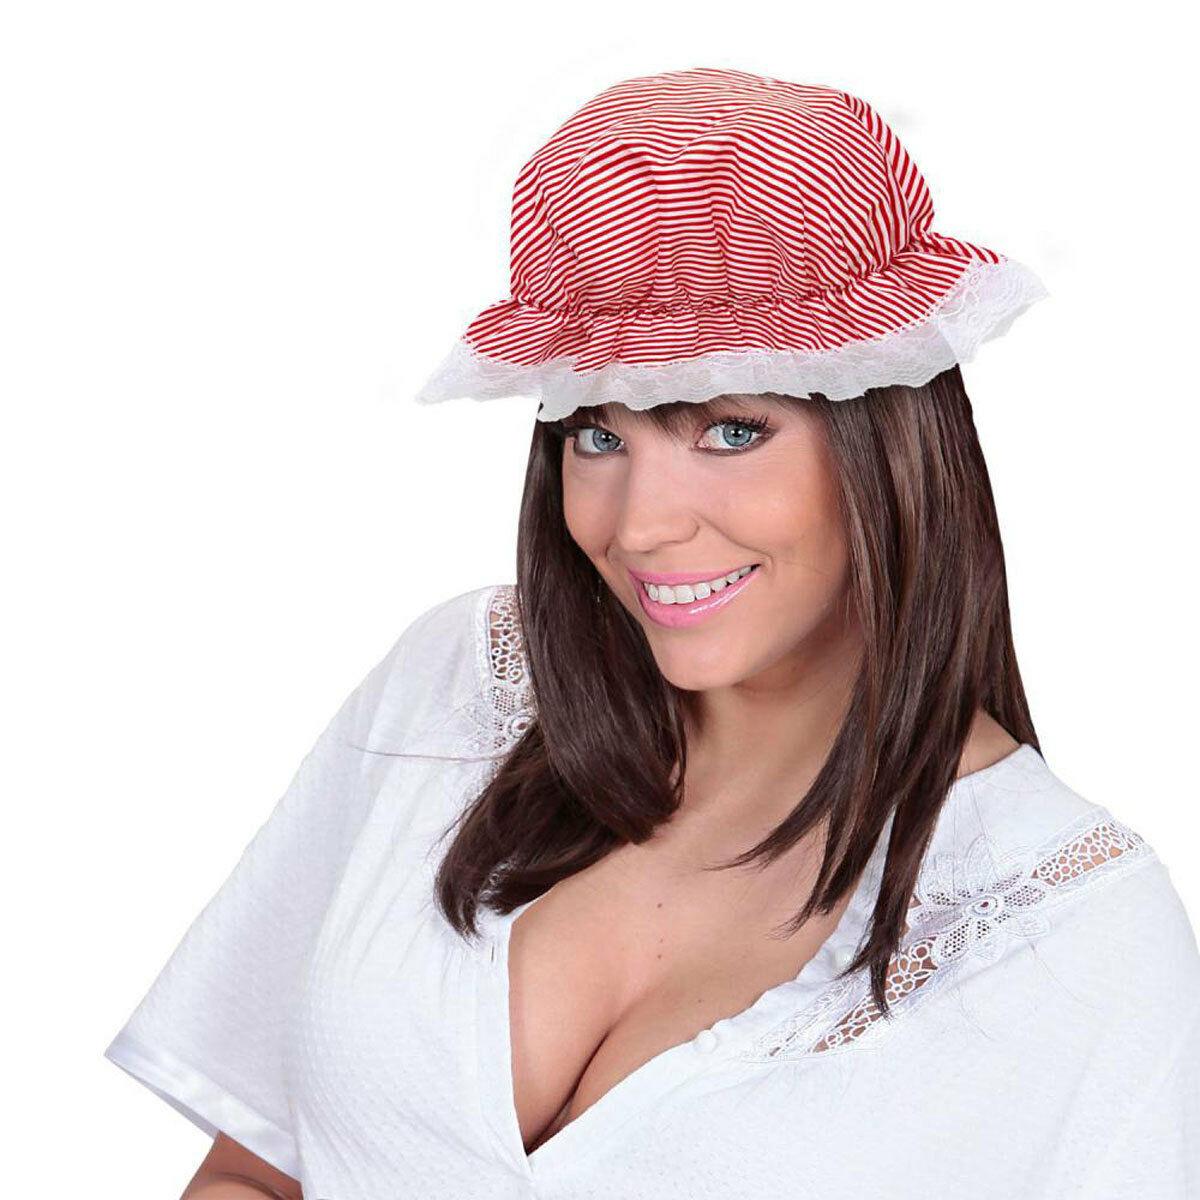 Stripped Mob Cap Bonnet with Lace Detailing Traditional Victorian Fancy Dress - Labreeze